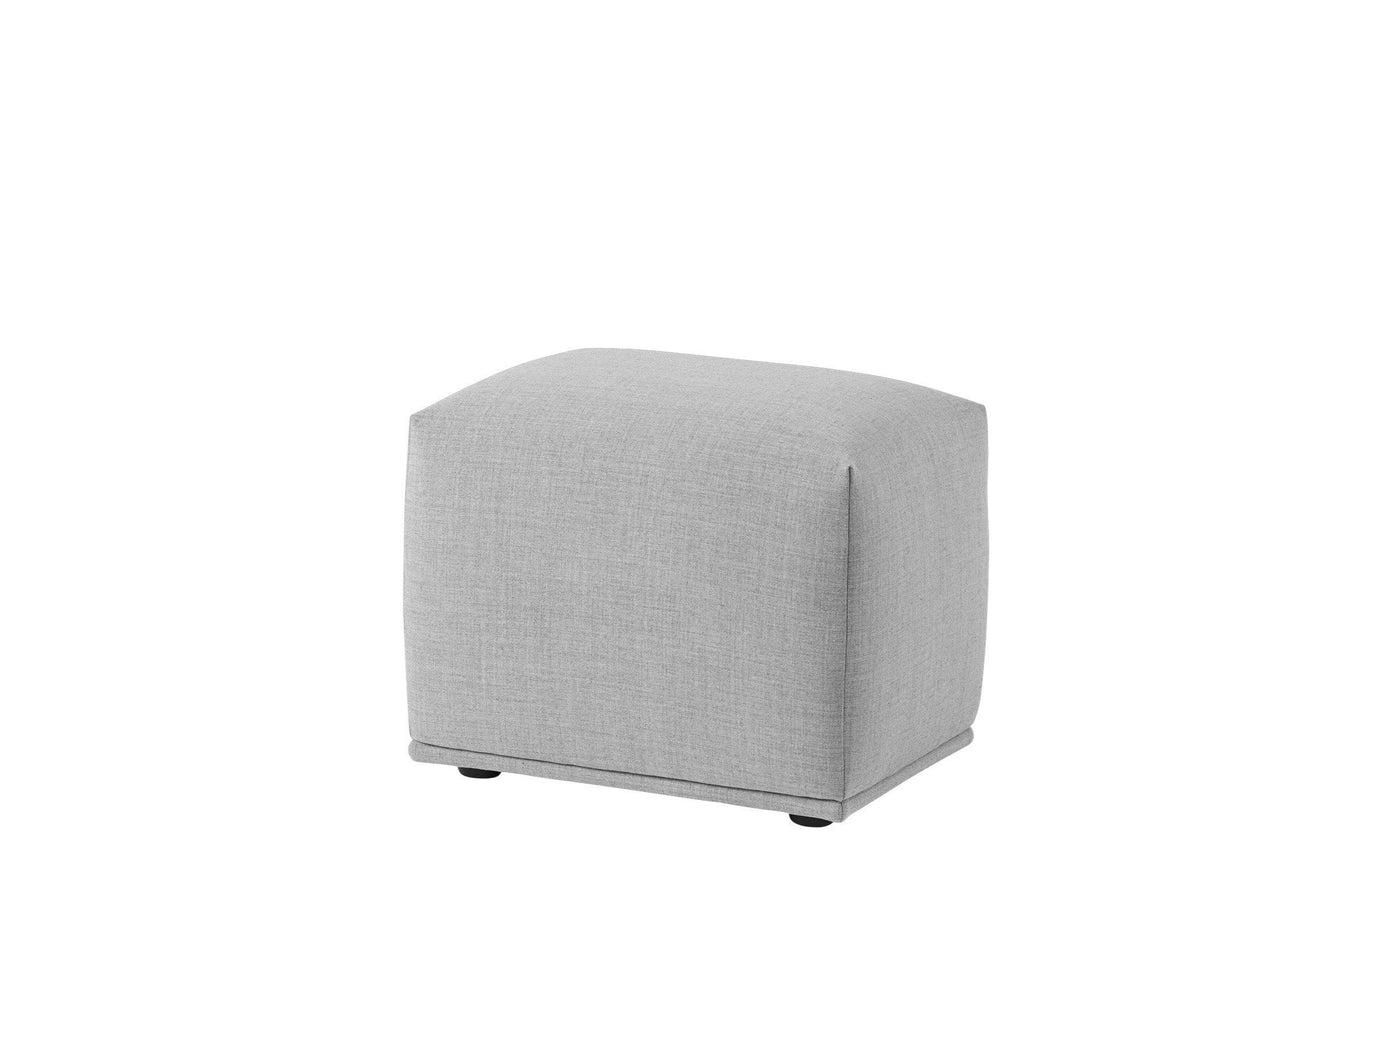 Muuto Echo Pouf W52 x D38cm in Remix 123 light grey Kvadrat fabric. made to order from someday designs. #colour_remix-123